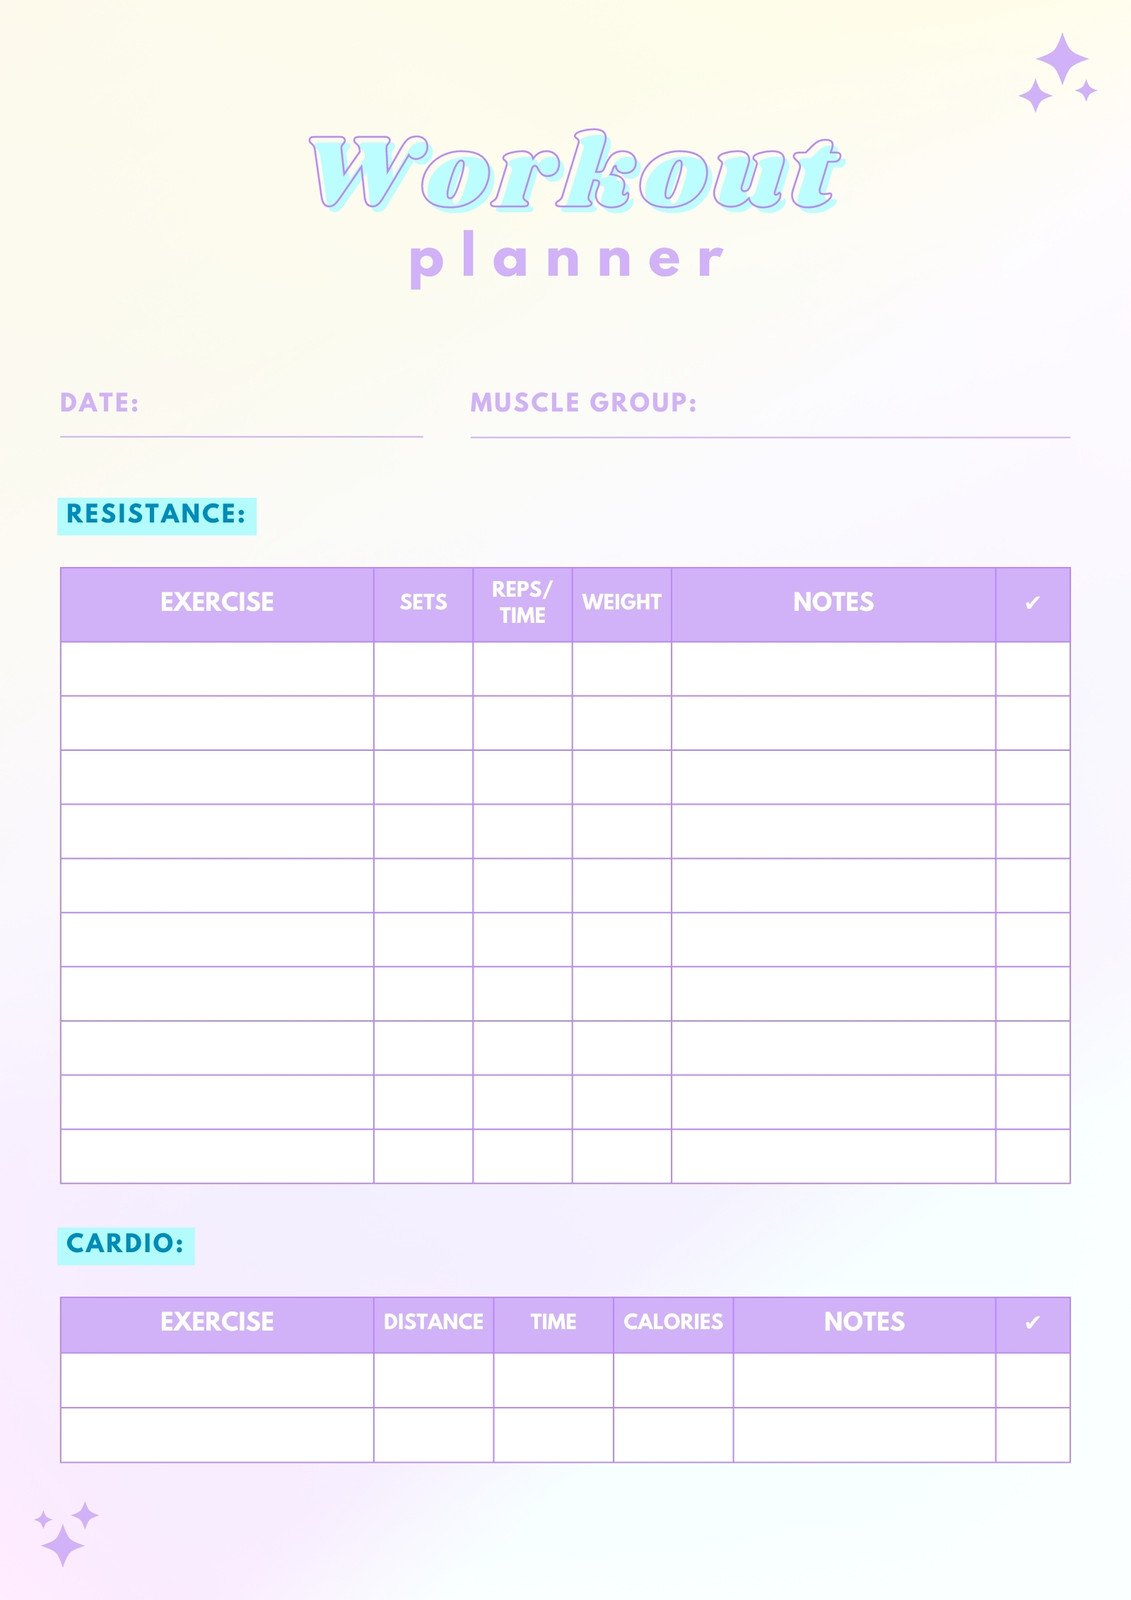 https://marketplace.canva.com/EAFRY2SO1cw/1/0/1131w/canva-pastel-modern-feminine-fitness-workout-daily-log-planner-ho_2zcmC9BY.jpg